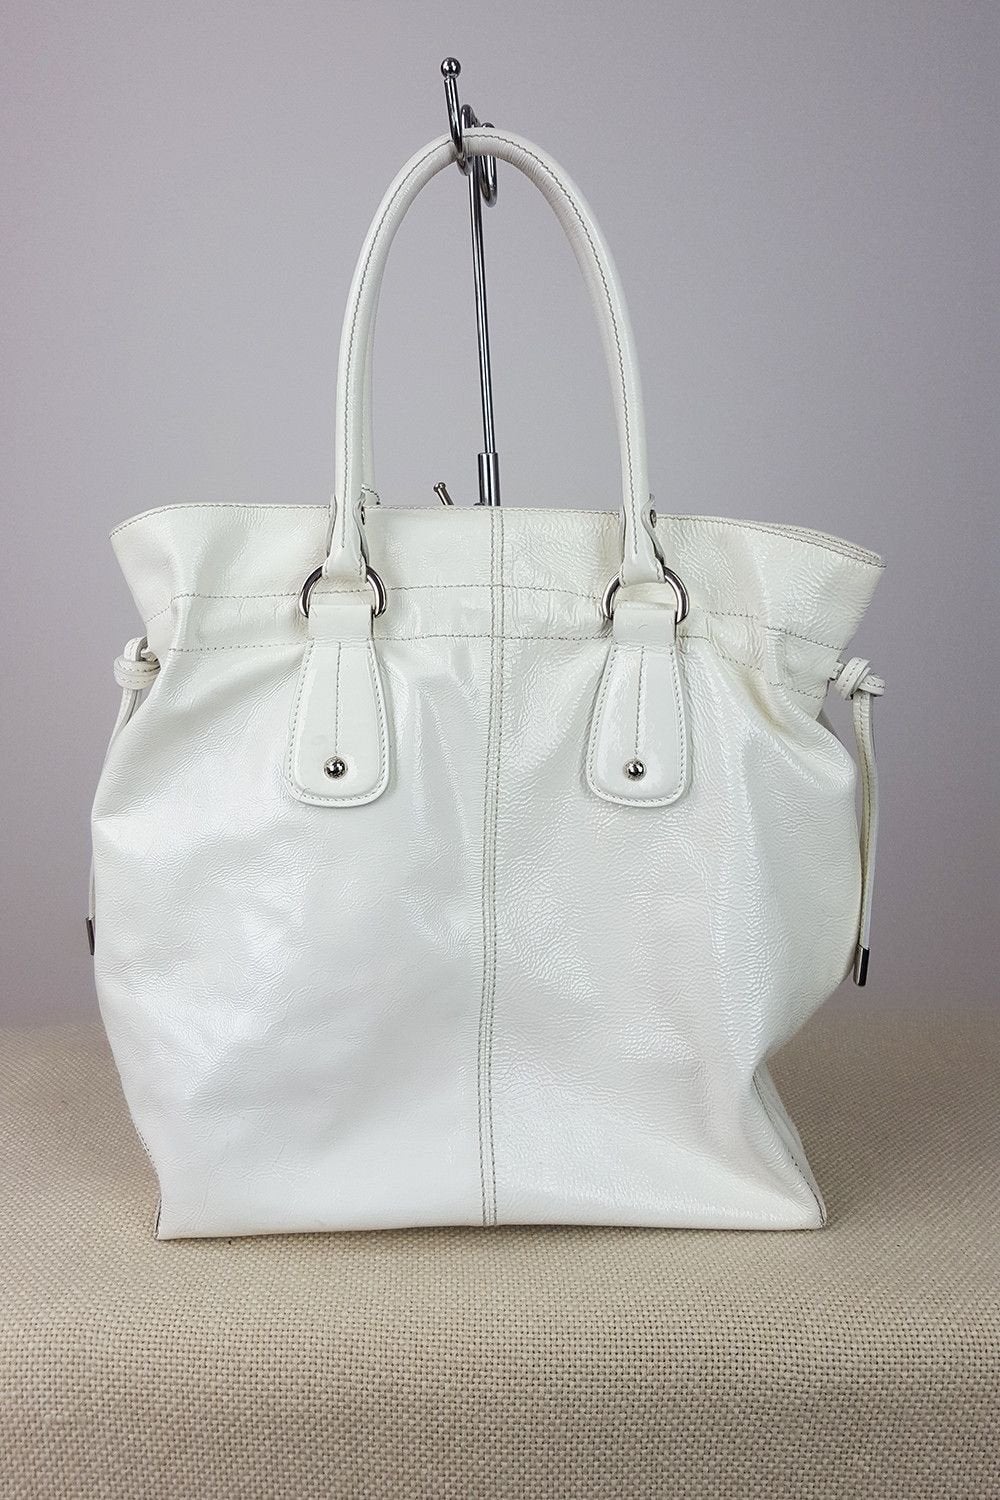 TOD'S White Patent Leather Shopper Bag-Tods-The Freperie